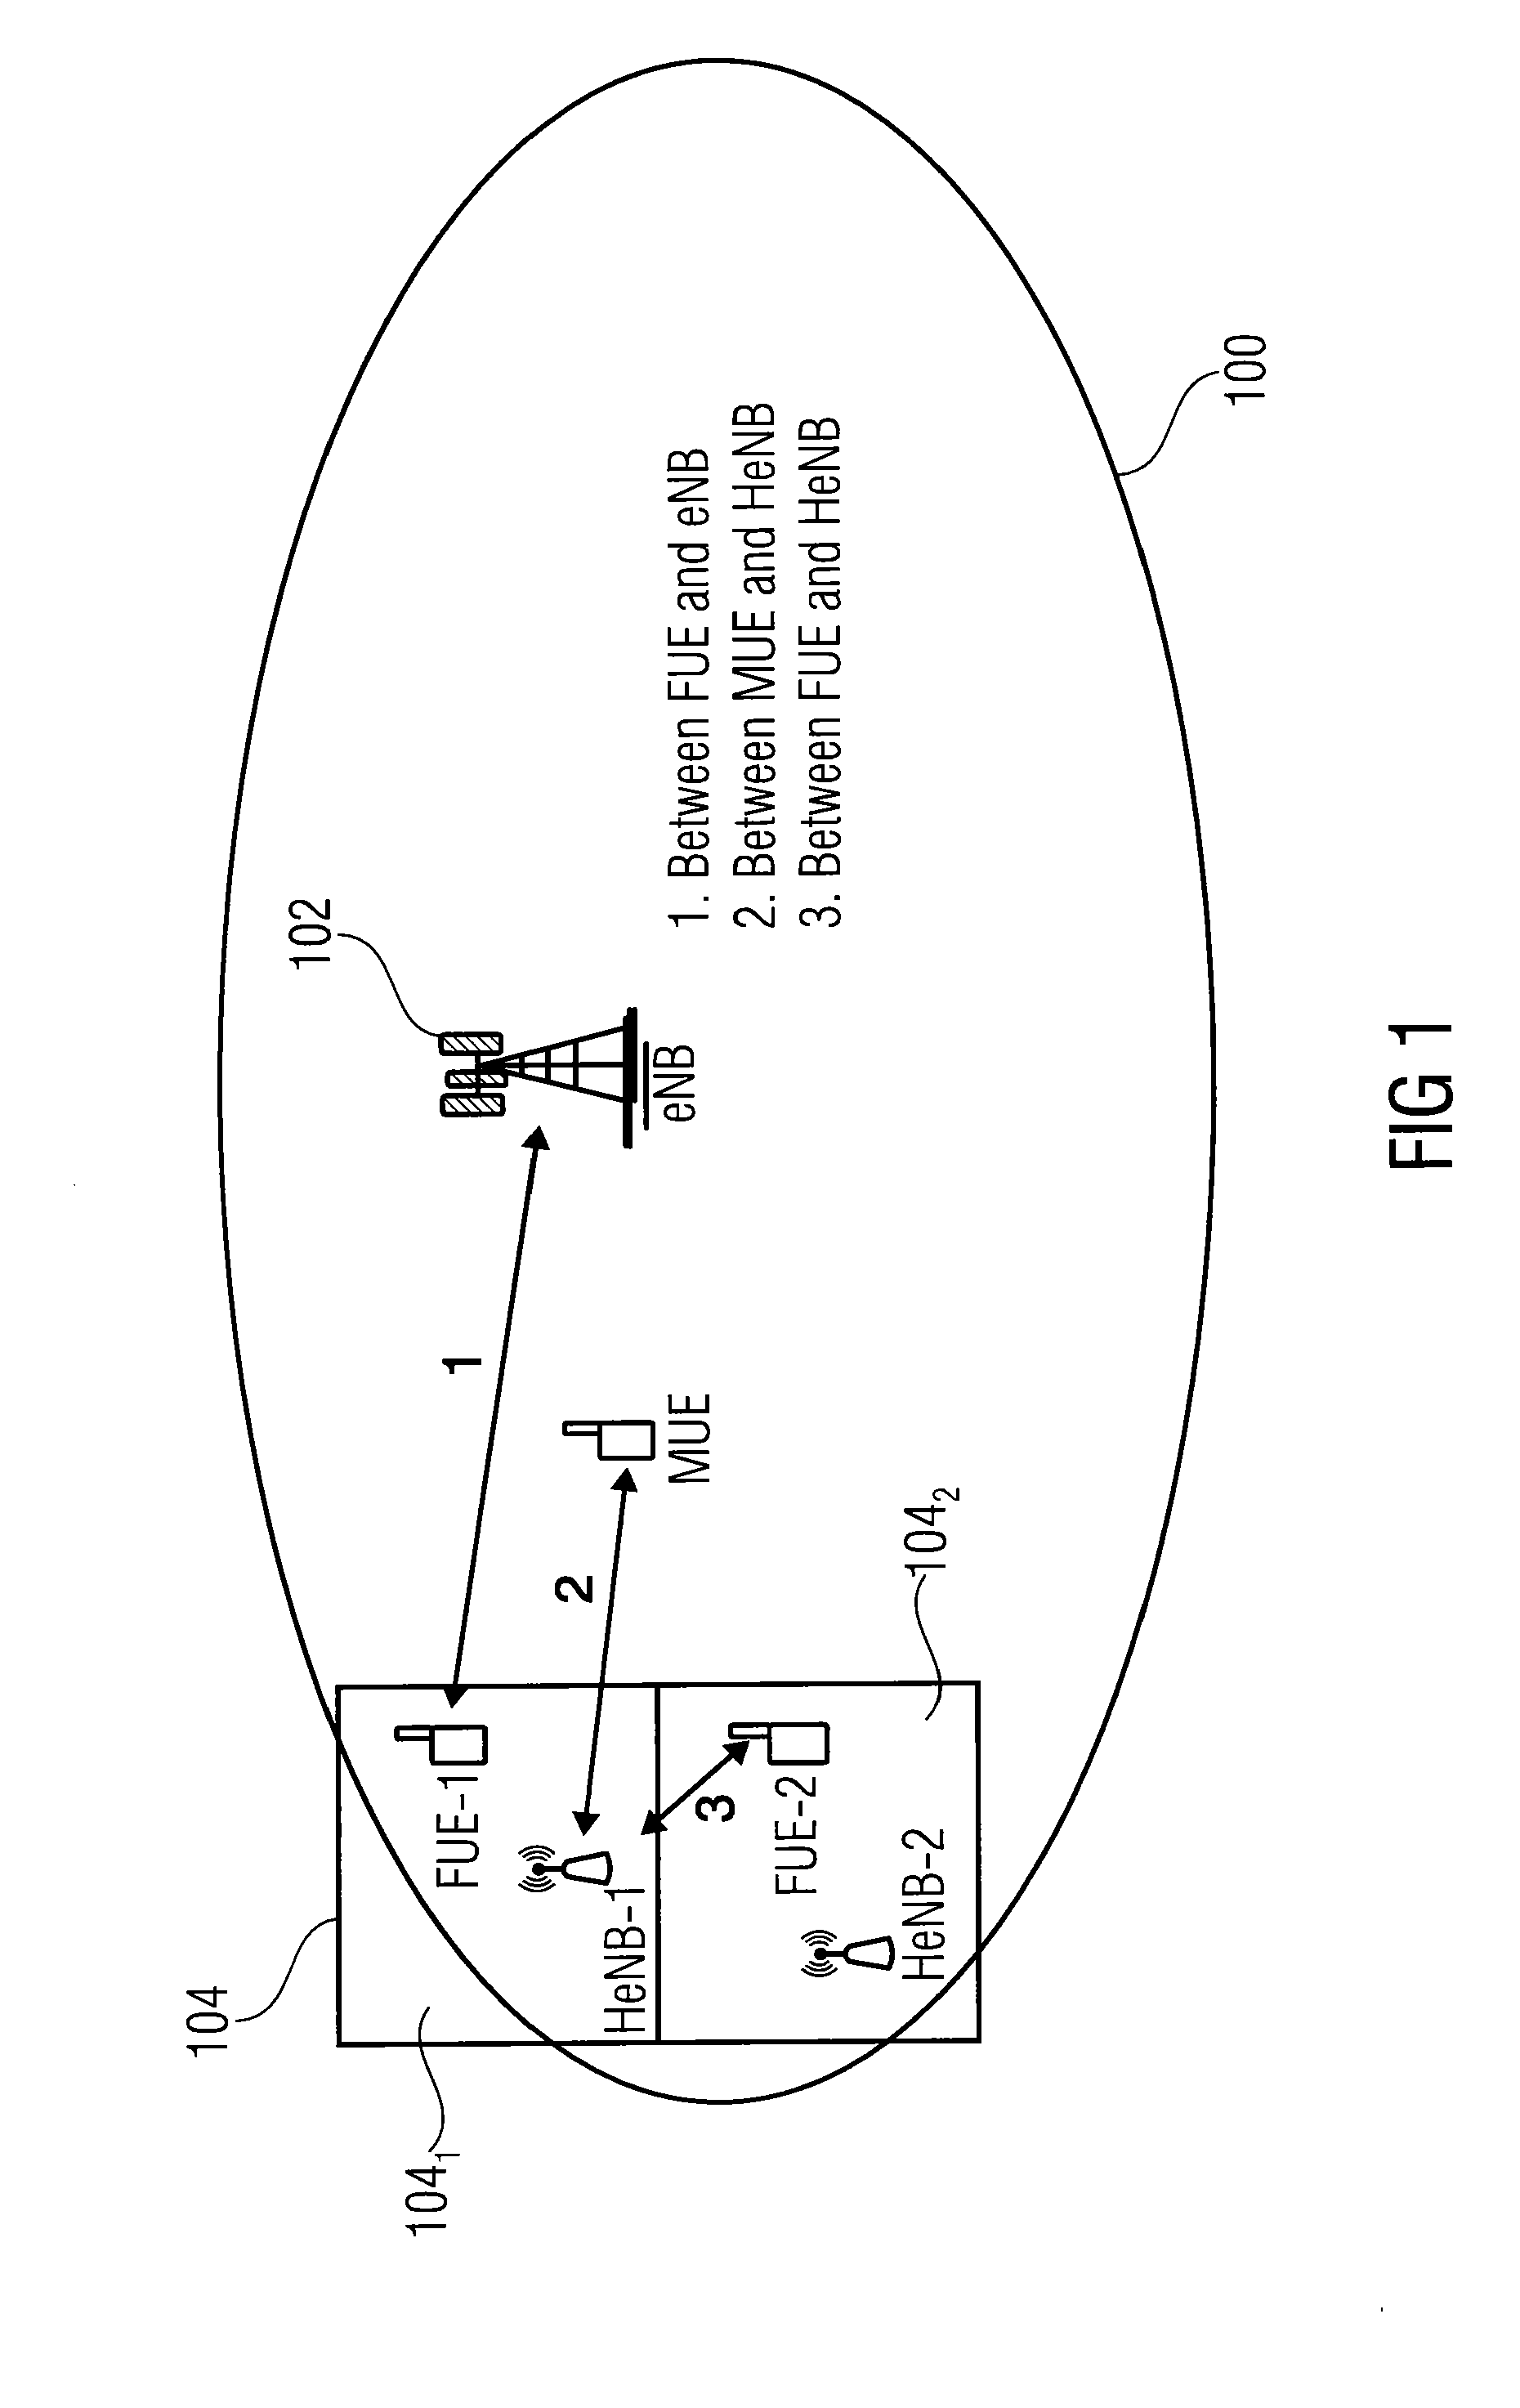 Method for assigning frequency subbands to a plurality of interfering nodes in a wireless communication network, controller for a wireless communication network and wireless communication network